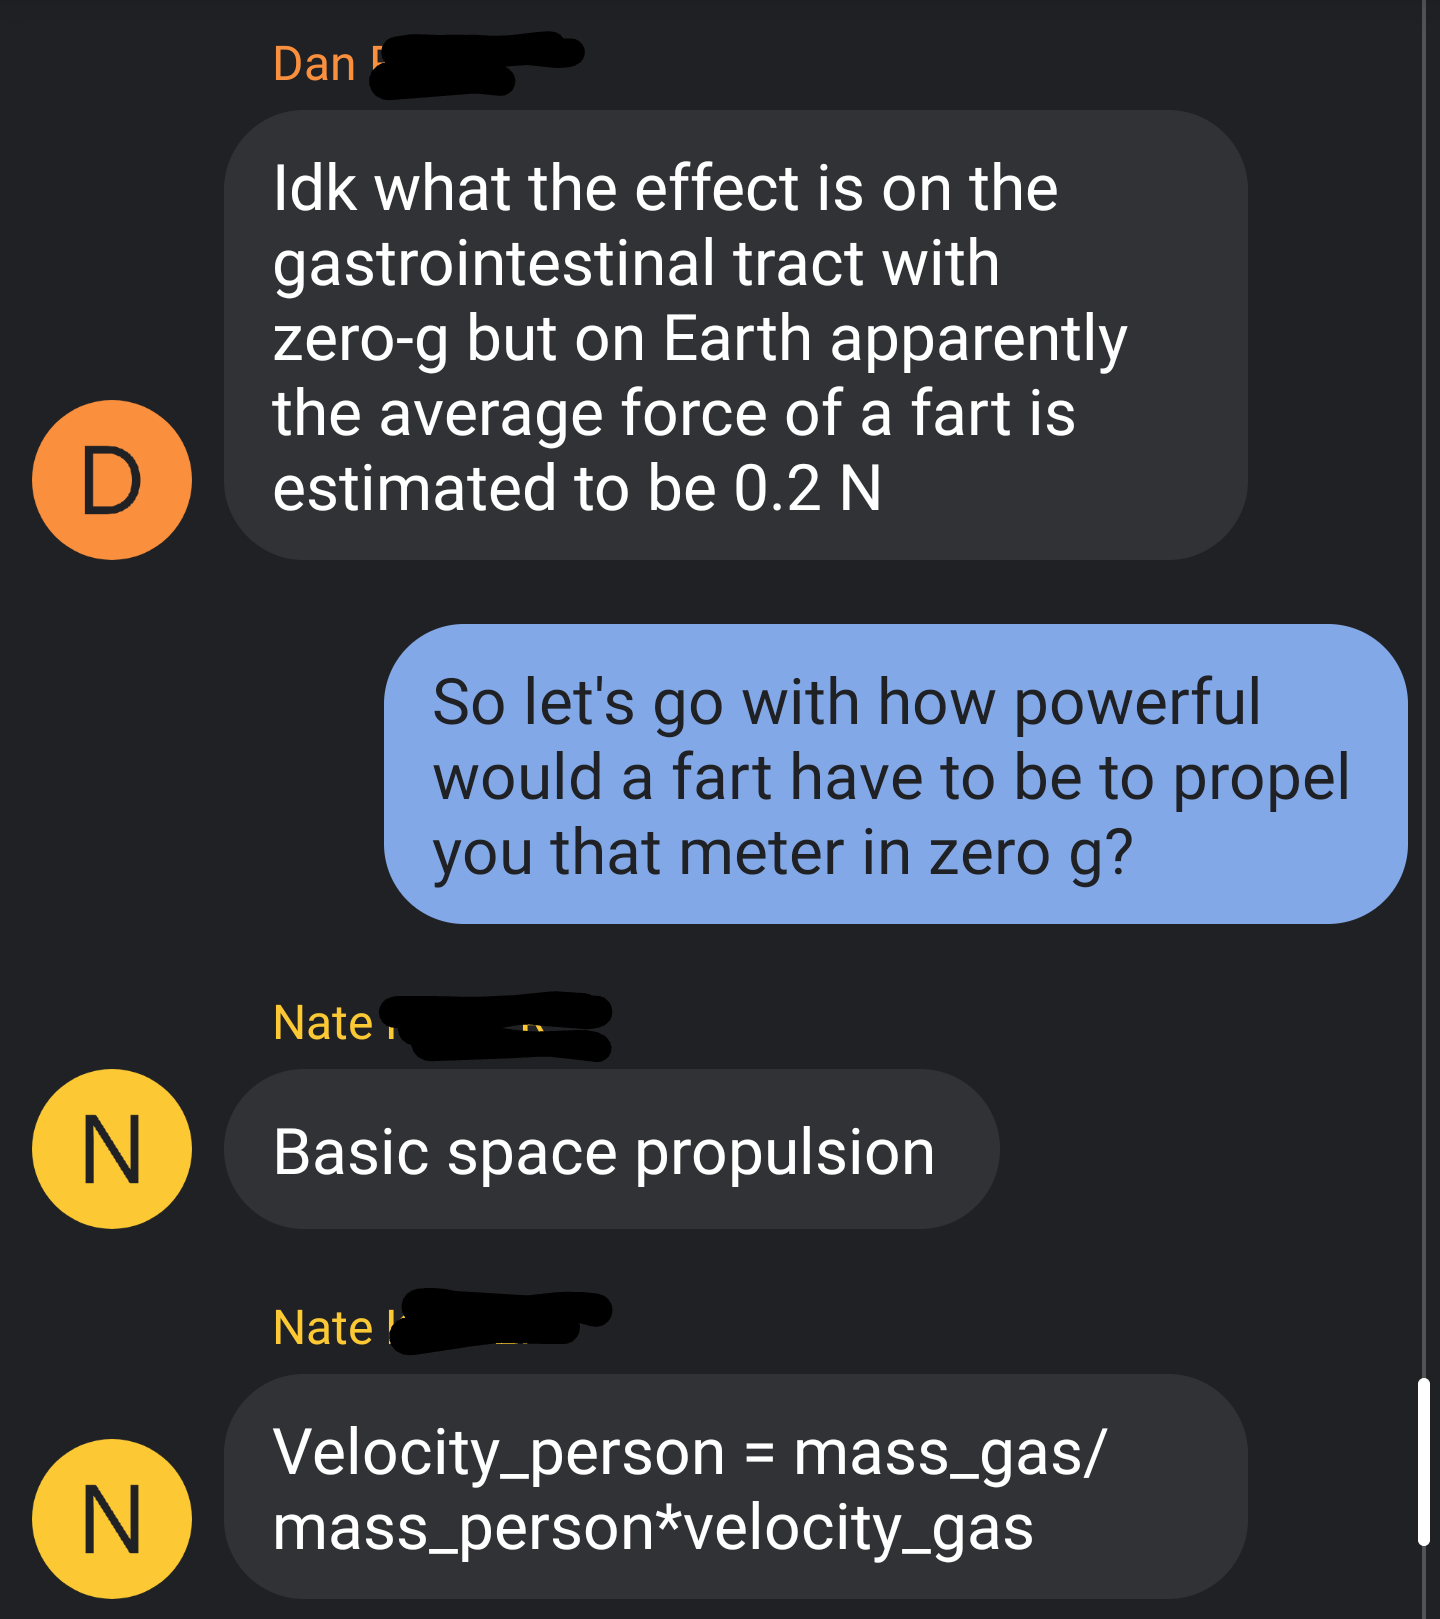 multimedia - Dan Idk what the effect is on the gastrointestinal tract with zerog but on Earth apparently the average force of a fart is estimated to be 0.2 N. So let's go with how powerful would a fart have to be to propel you that meter in zero g? Nate. 